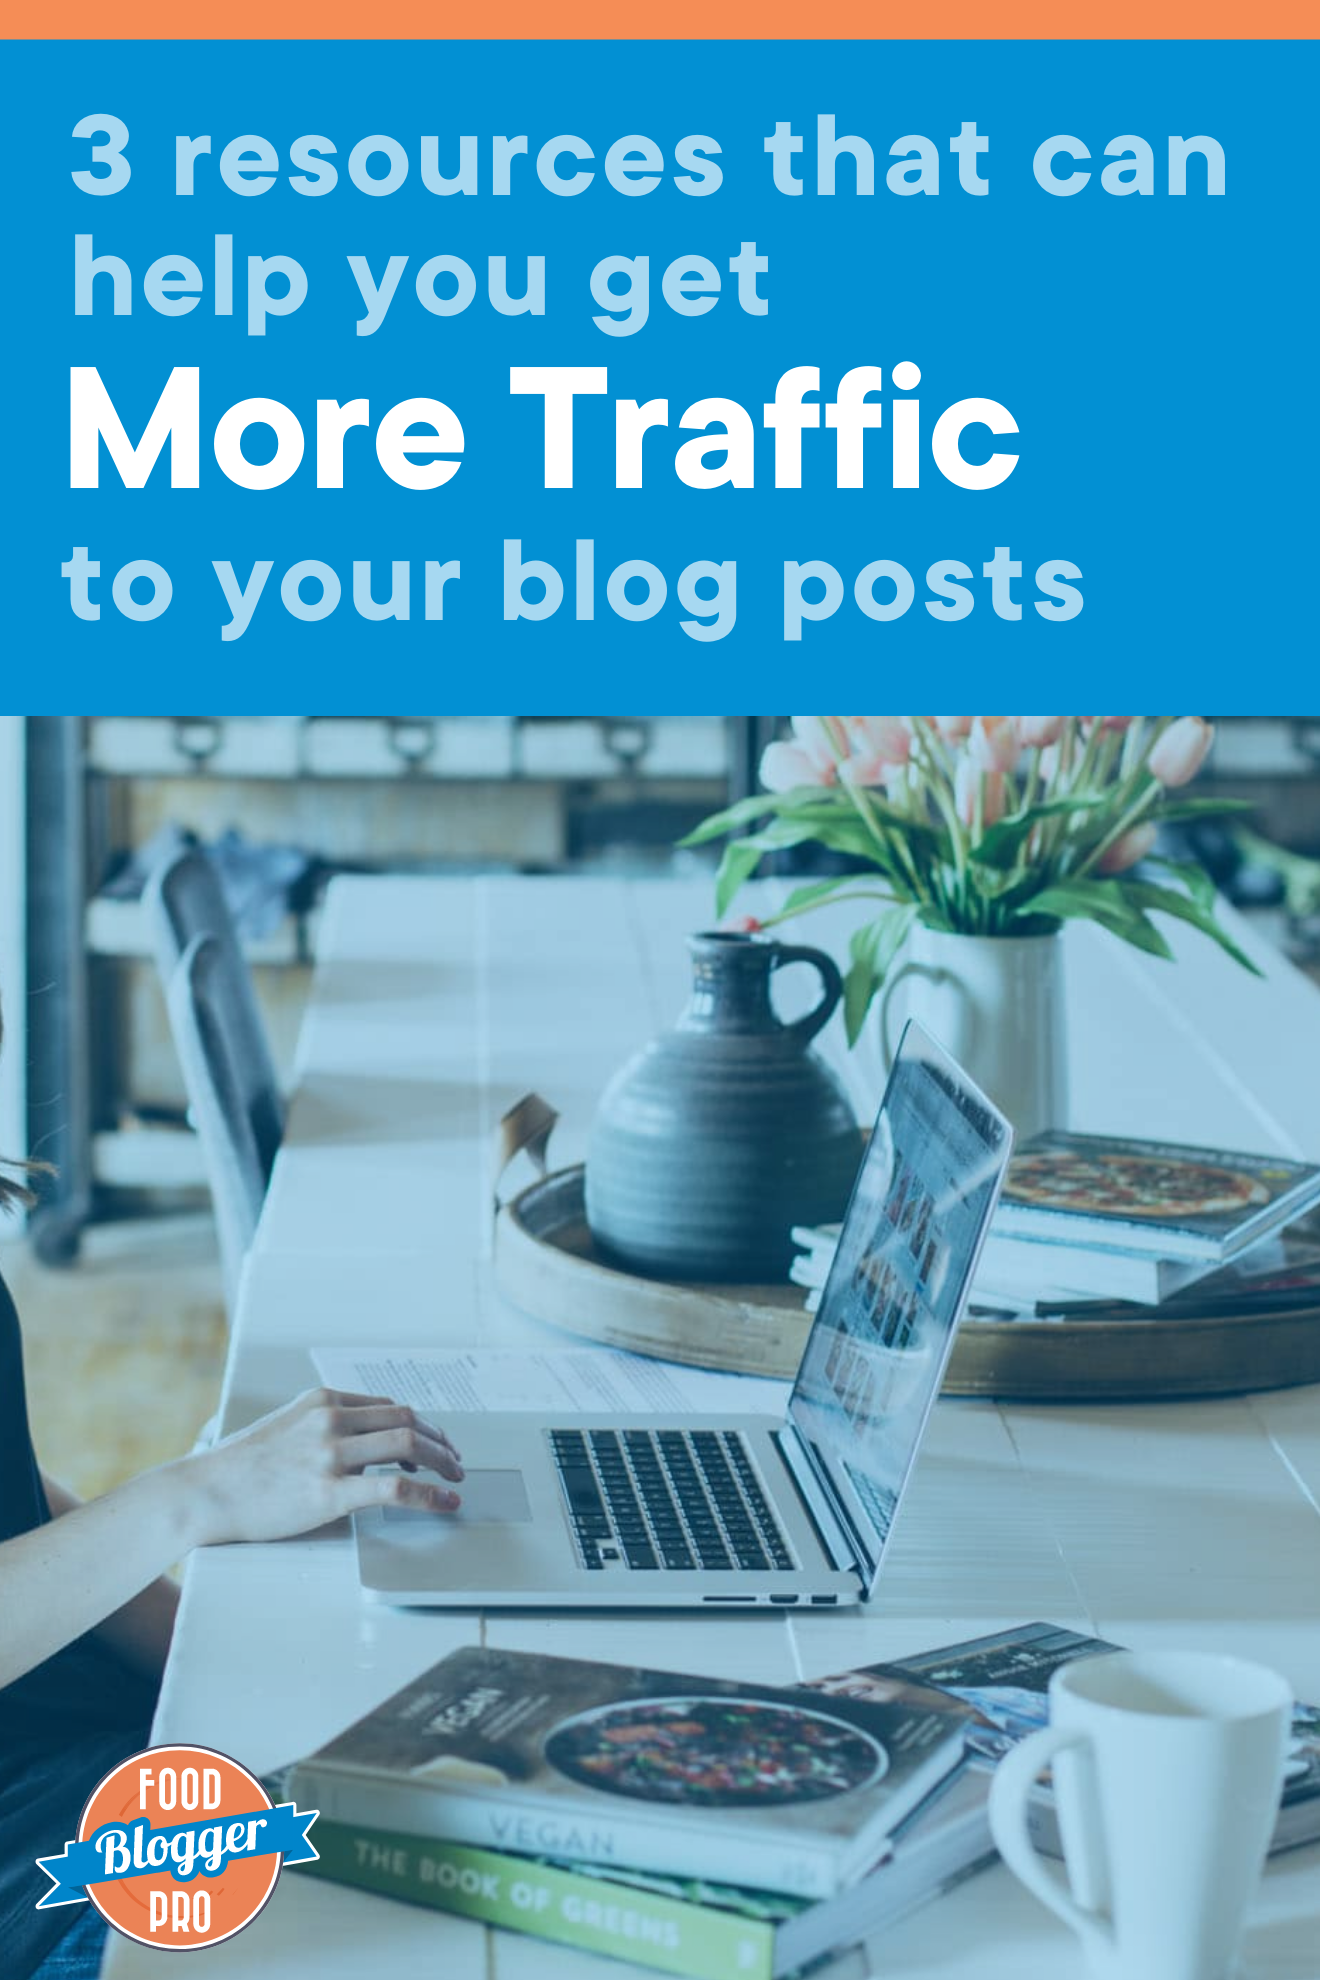 a photo of a computer on a desk with the title of this article, '3 resources that can help you get More Traffic to your blog posts'